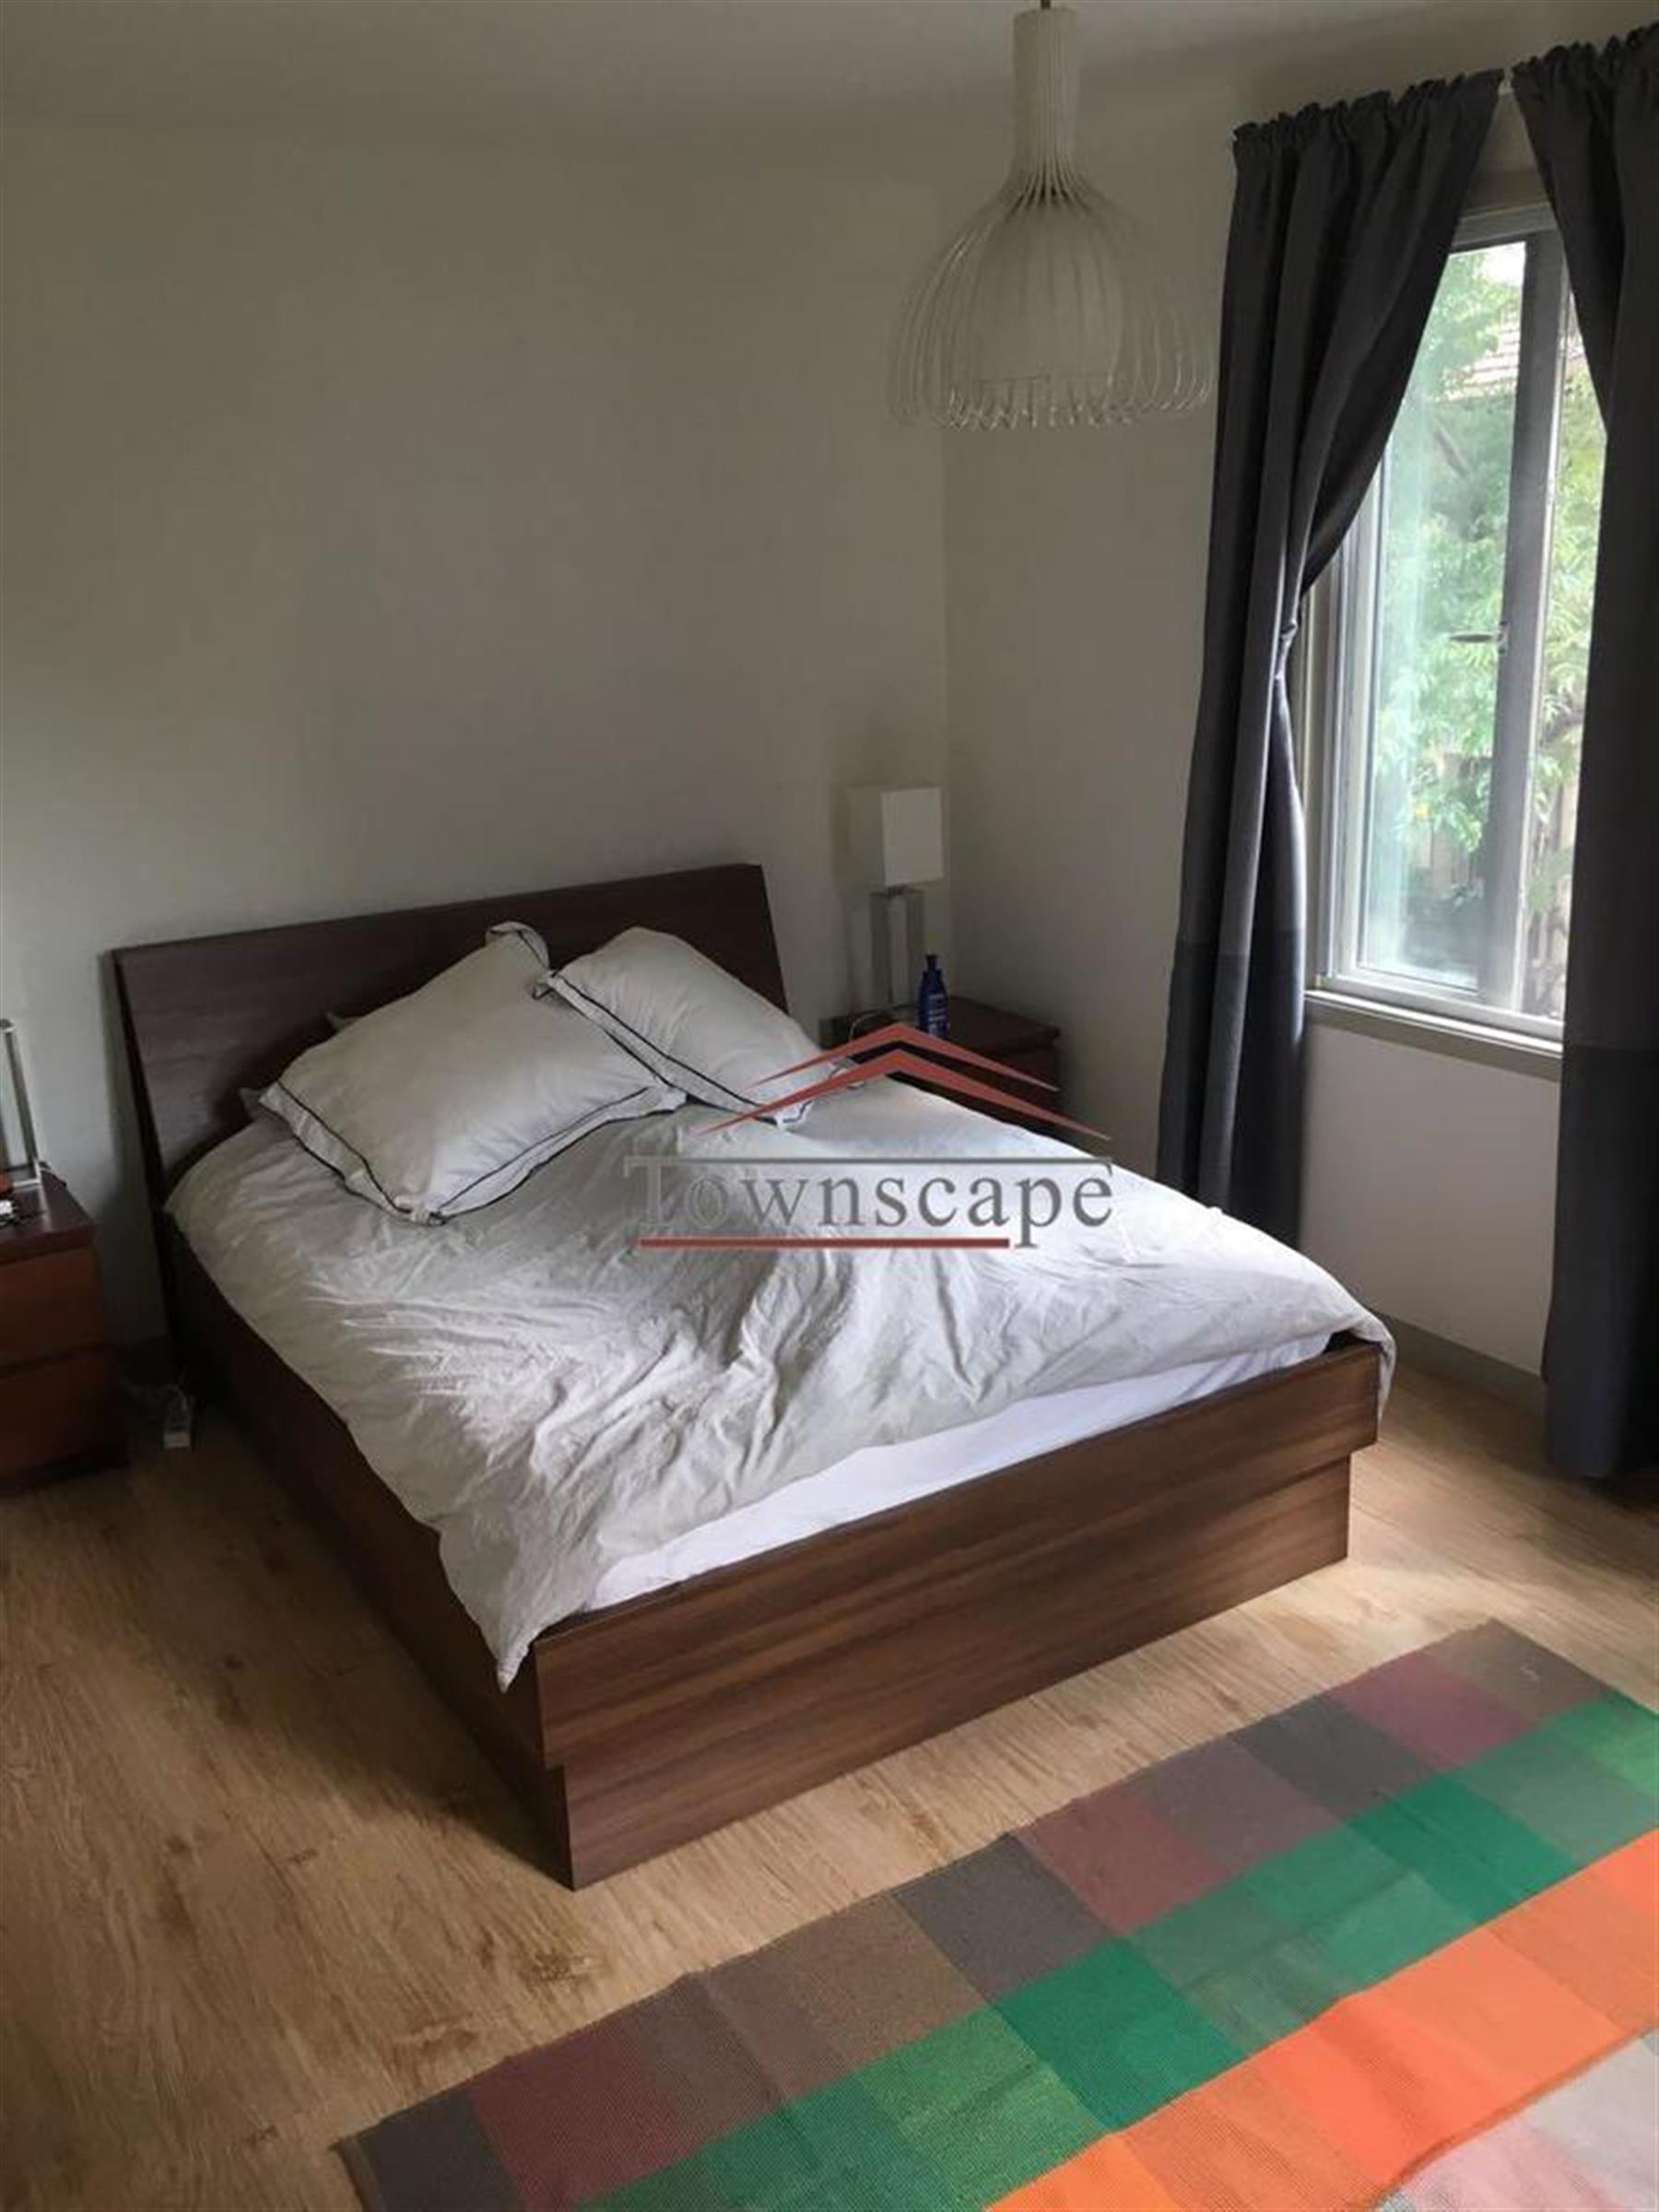 big bedroom Comfy Ergo-designed Spacious 2BR Yongjia Rd Apartment for Rent in Shanghai